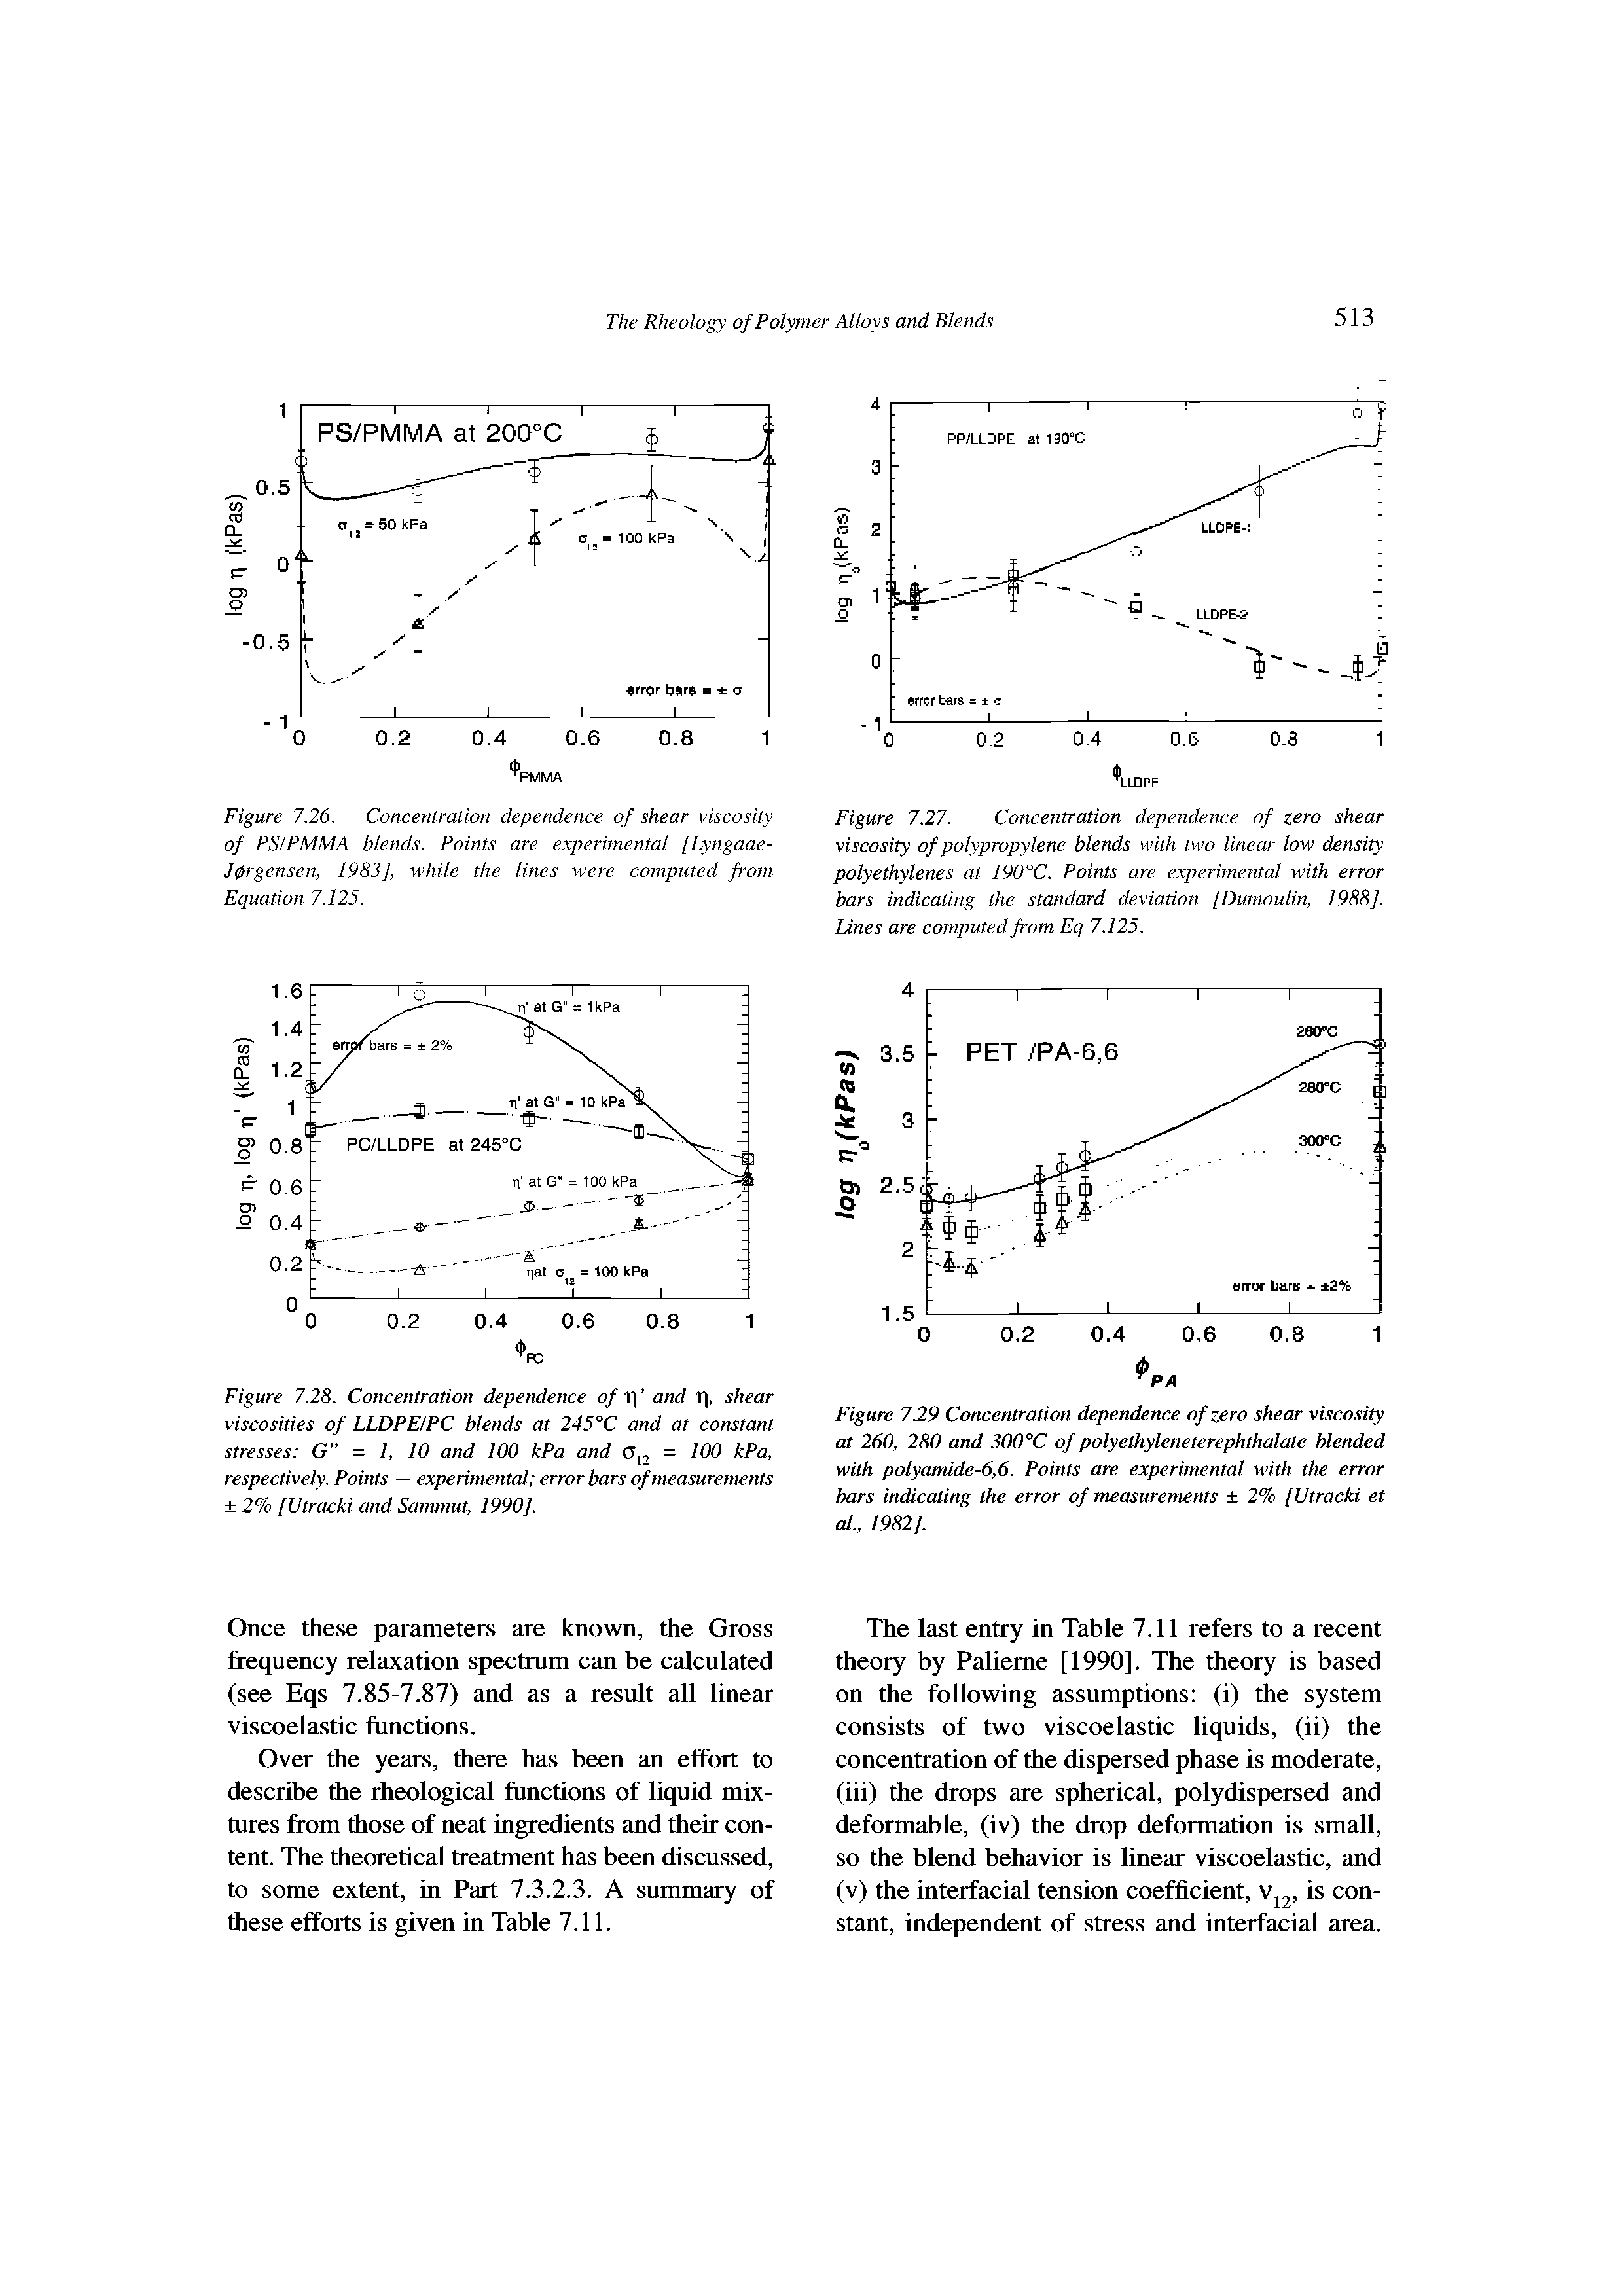 Figure 7.27. Concentration dependence of zero shear viscosity of polypropylene blends with two linear low density polyethylenes at 190°C. Points are experimental with error bars indicating the standard deviation [Dumoulin, 1988]. Lines are computed from Eq 7.125.